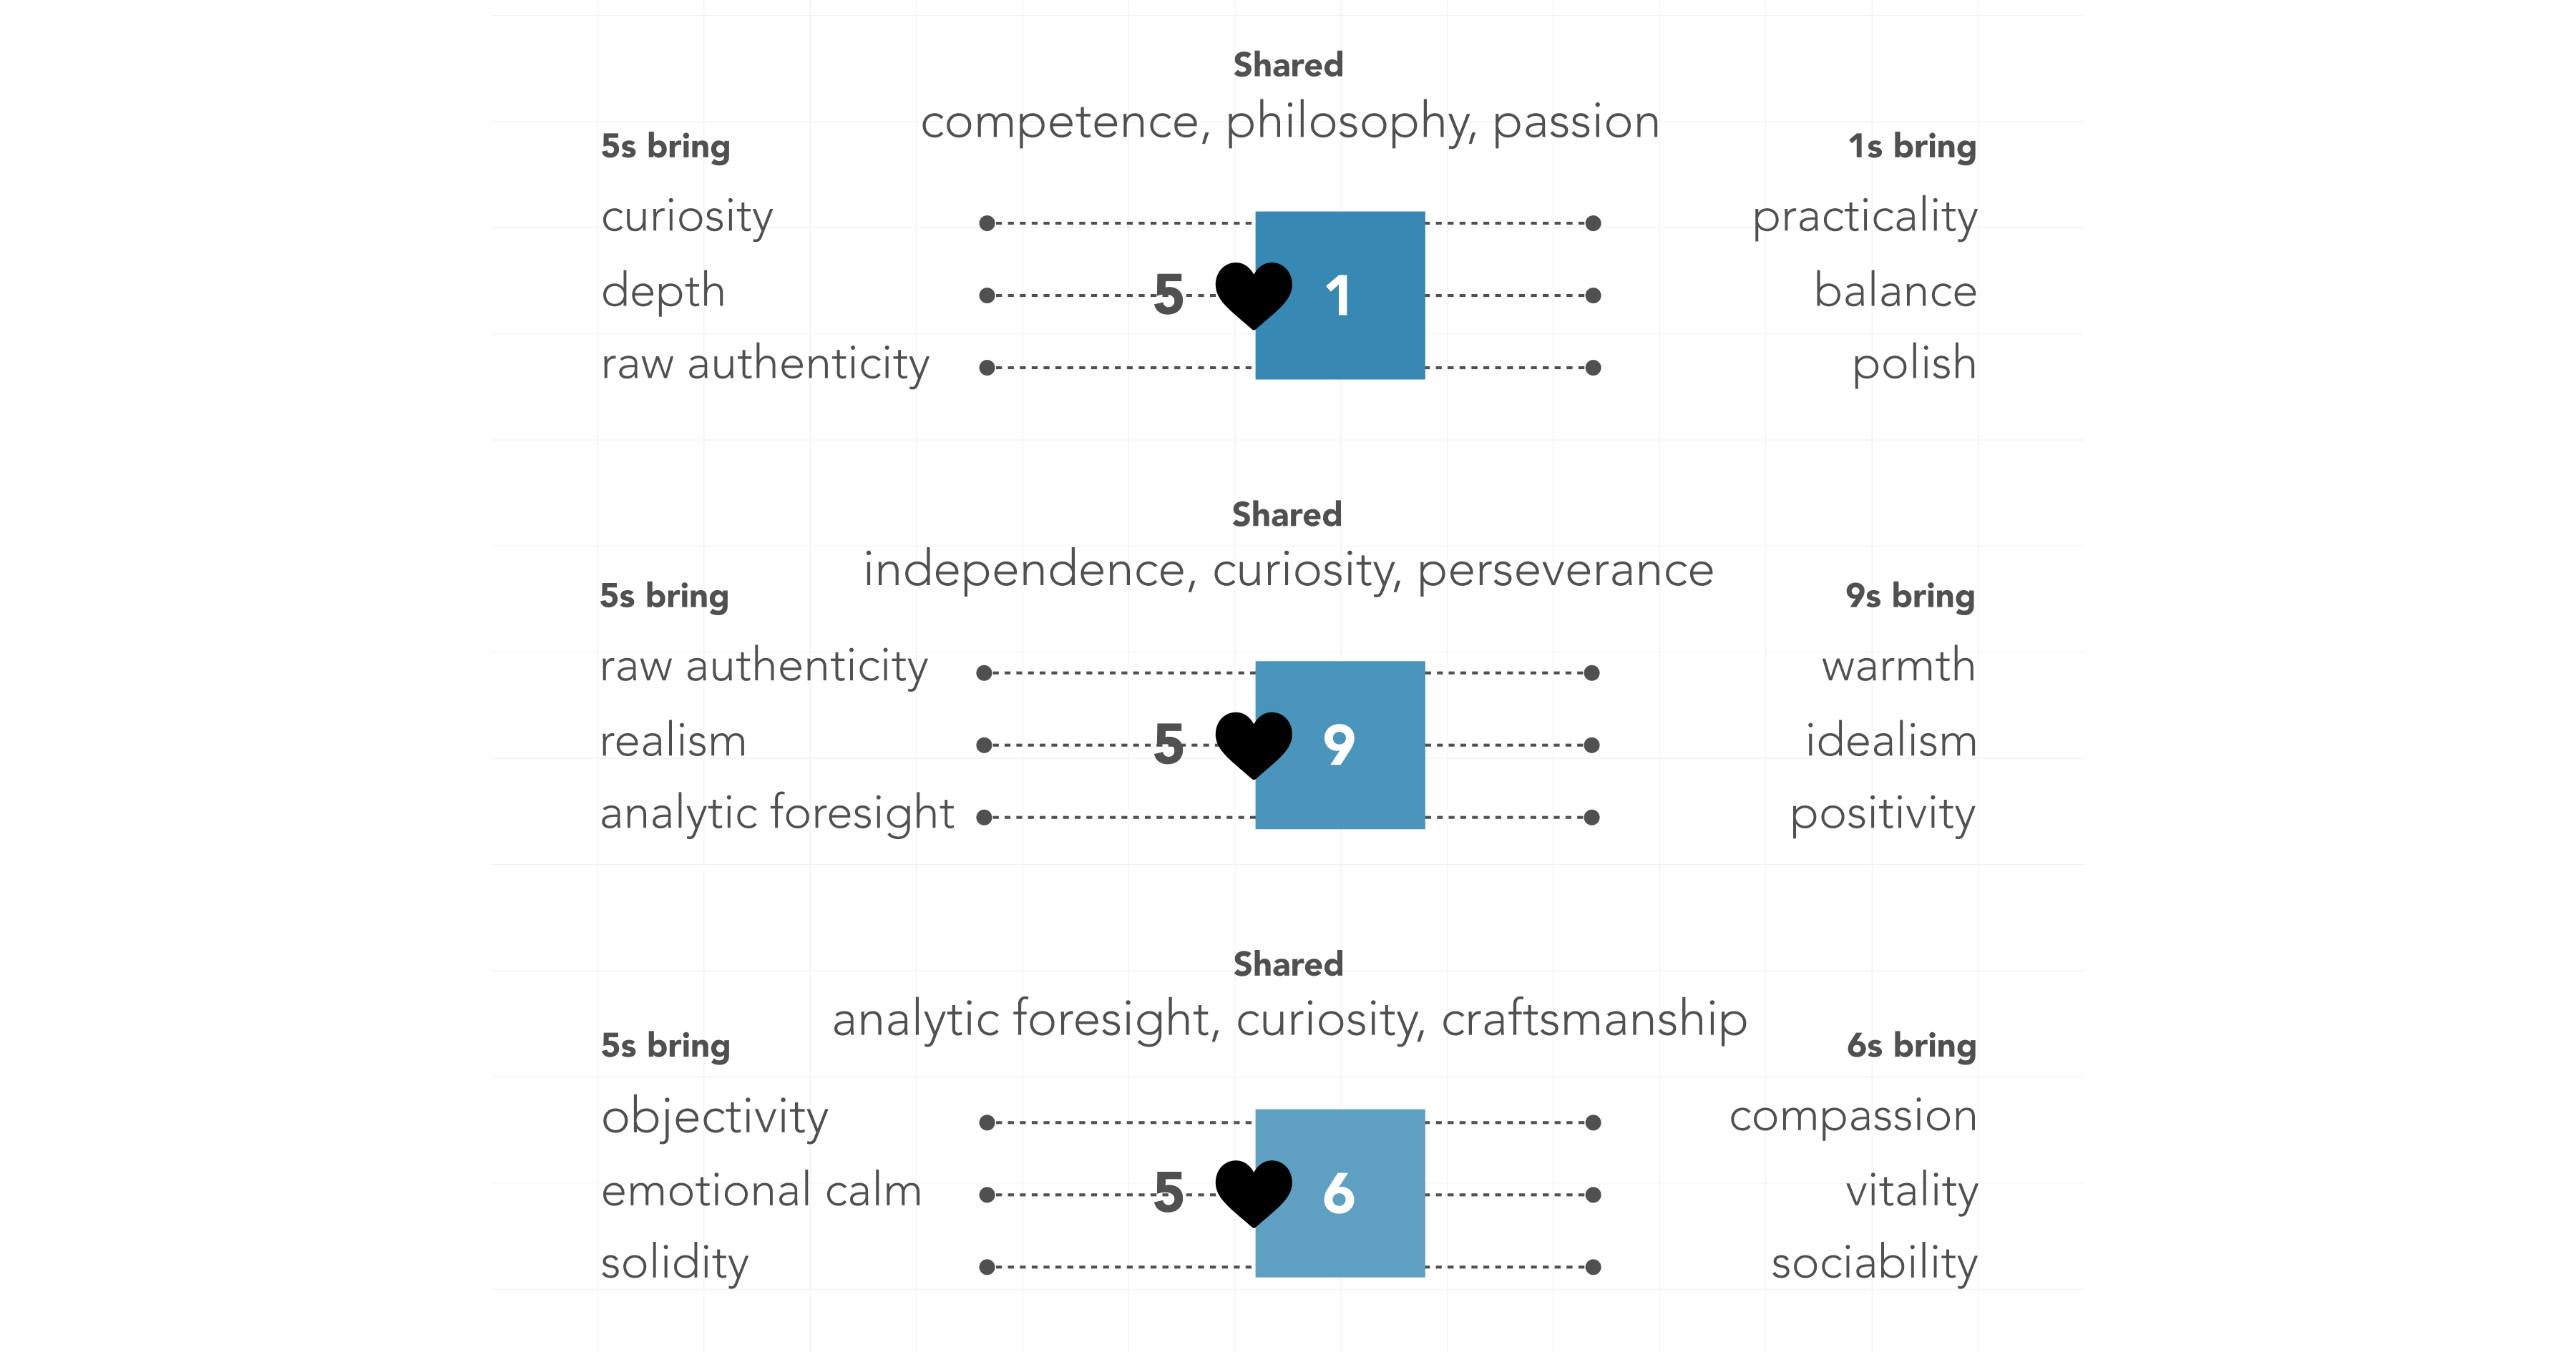 5s and 1s share competence, philosophy, passion. 5s bring curiosity, depth, raw authenticity. 1s bring practicality, balance, polish. 5s and 9s share independence, curiosity, perseverance. 5s bring raw authenticity, realism, analytic foresight. 9s bring warmth, idealism, positivity. 5s and 6s share analytic foresight, curiosity, craftsmanship. 5s bring objectivity, emotional calm, solidity. 6s bring compassion, vitality, sociability.